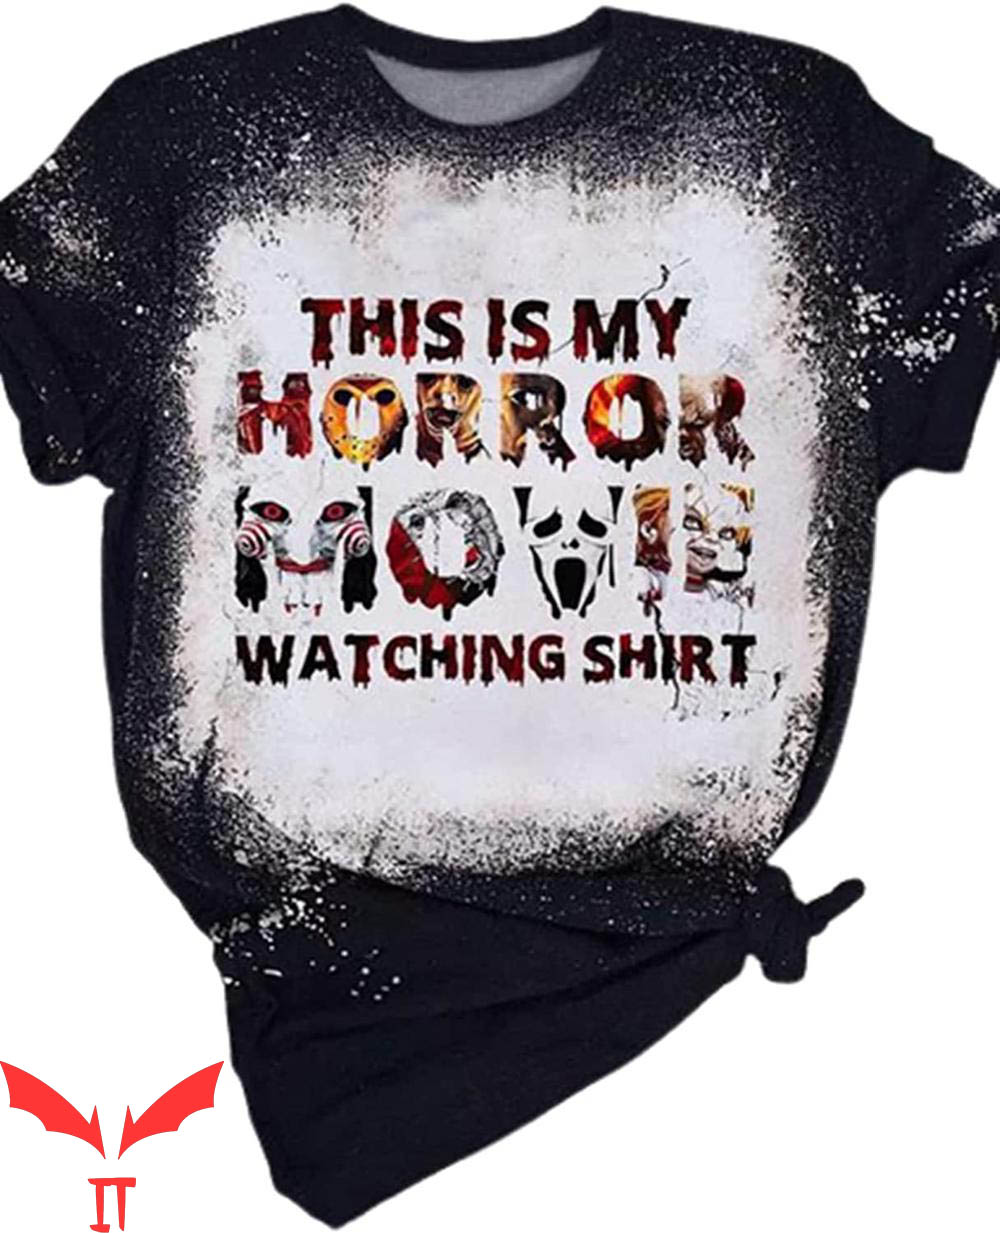 IT The Clown T-Shirt This Is My Horror Movie Watching IT